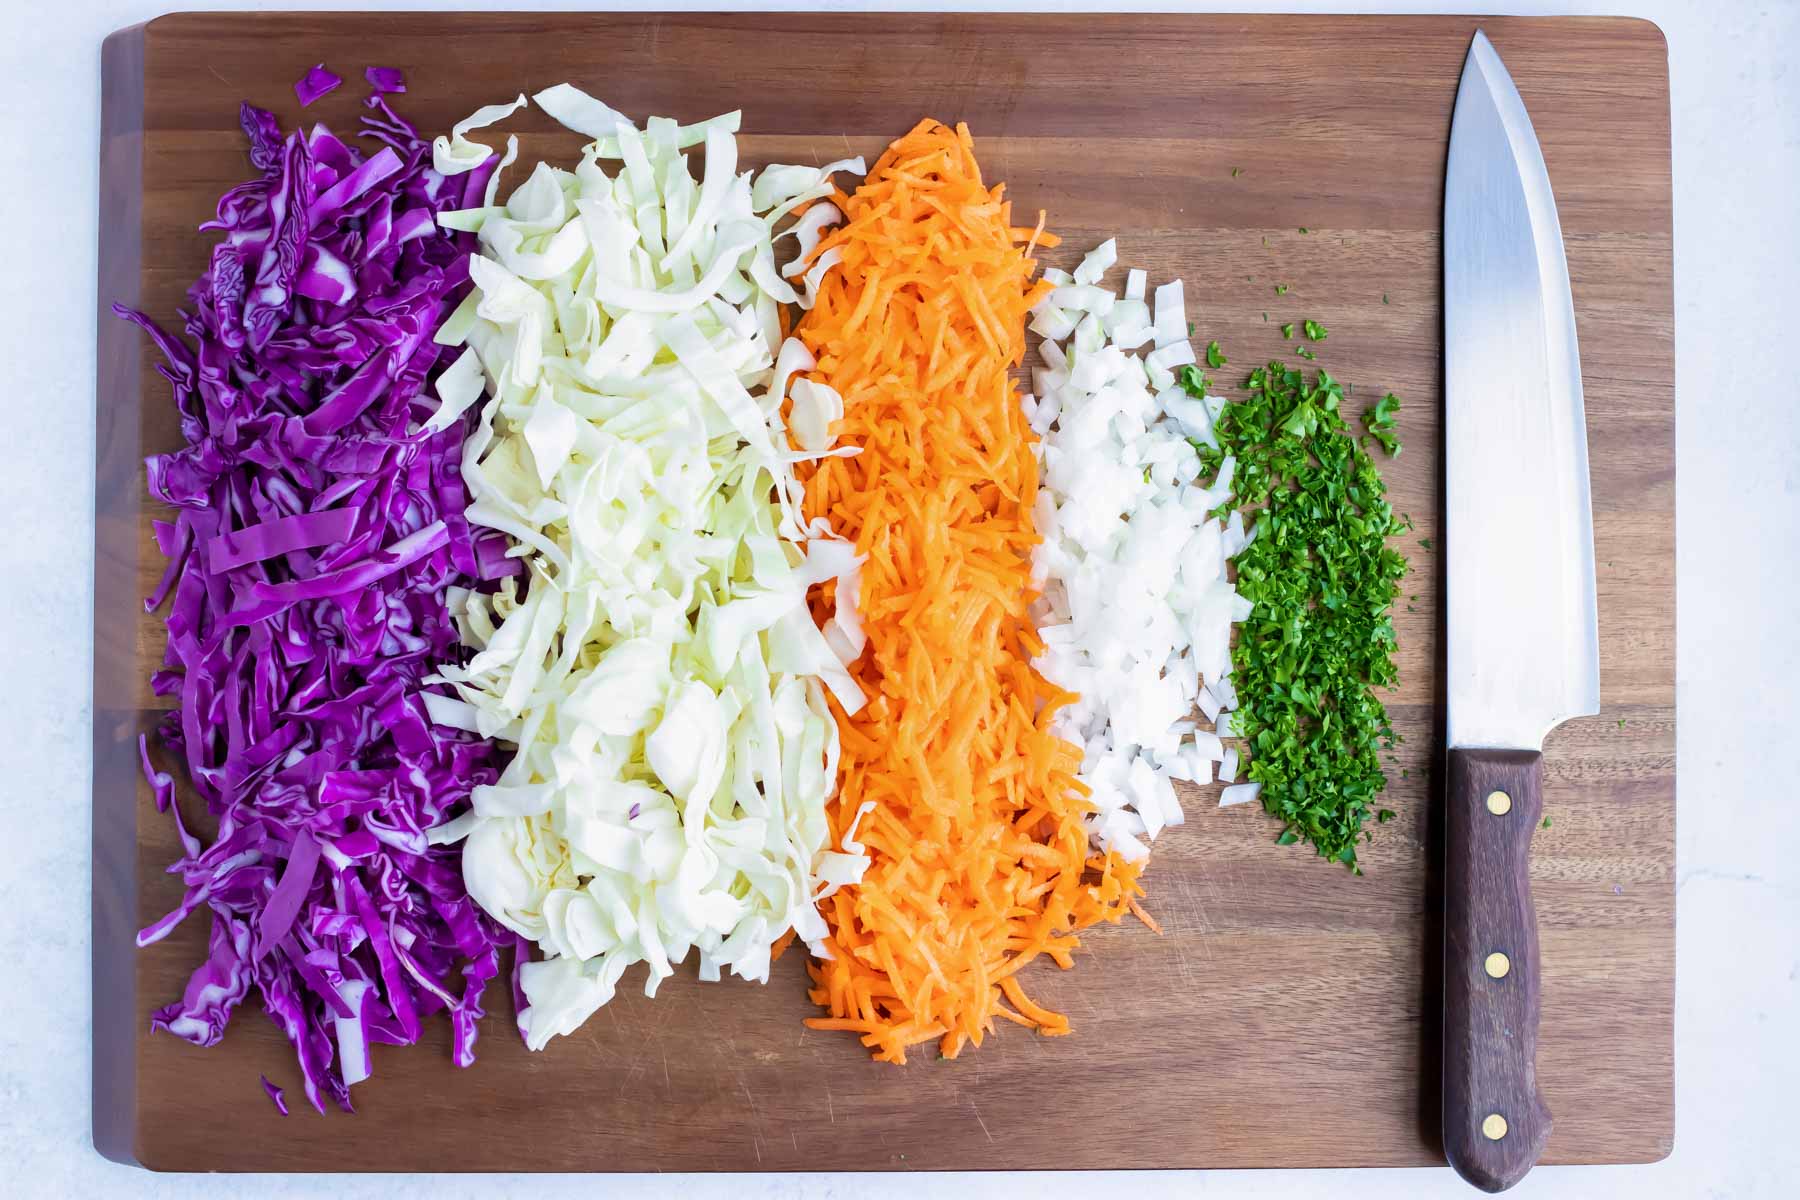 Shredded red cabbage, green cabbage, carrots, onion, and parsley on a chopping board.